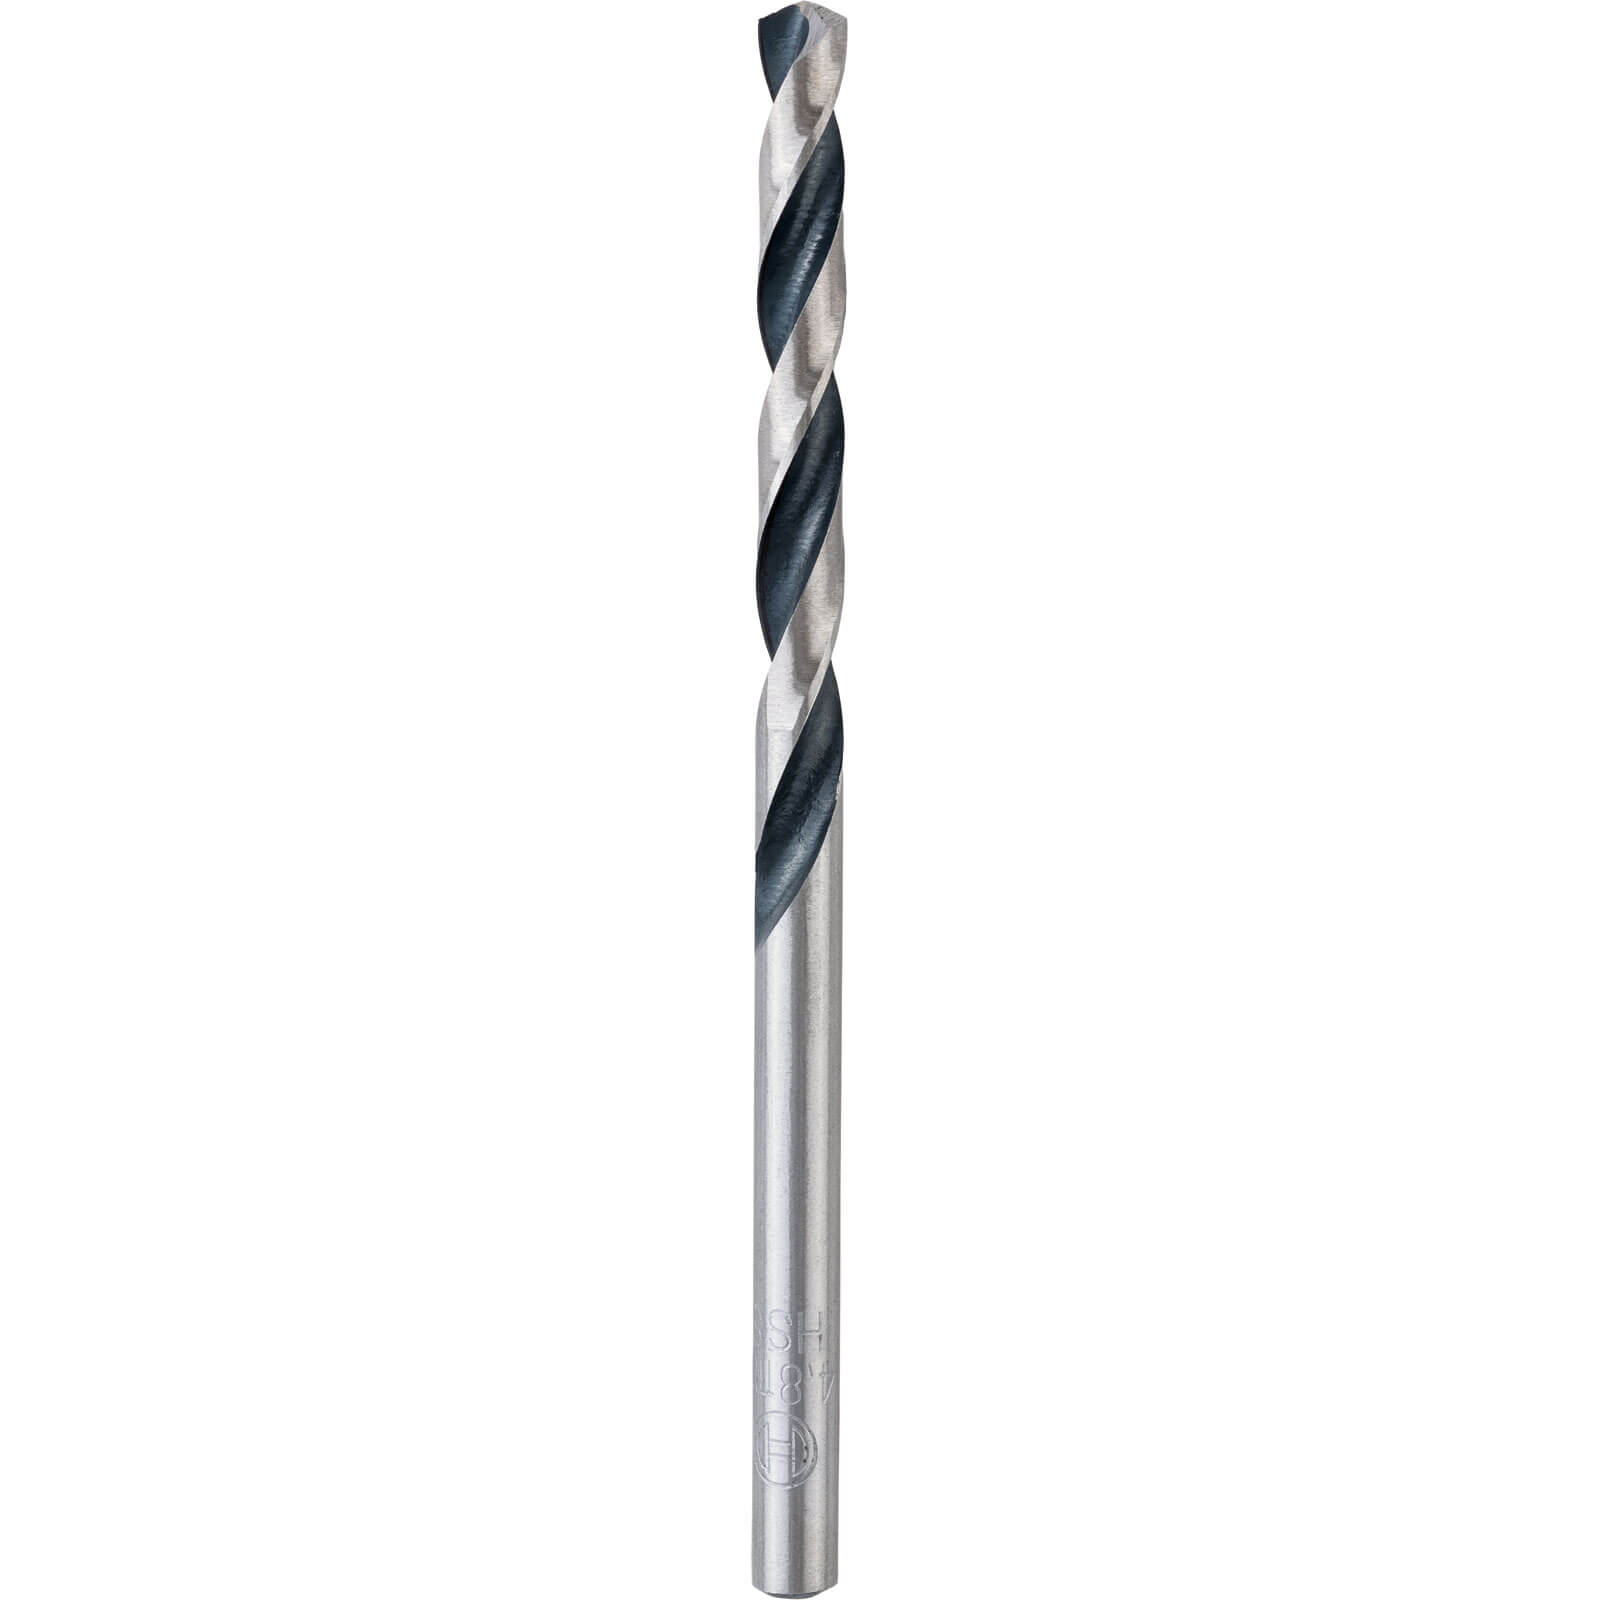 Image of Bosch HSS PointTeQ Drill Bit 4.8mm Pack of 1